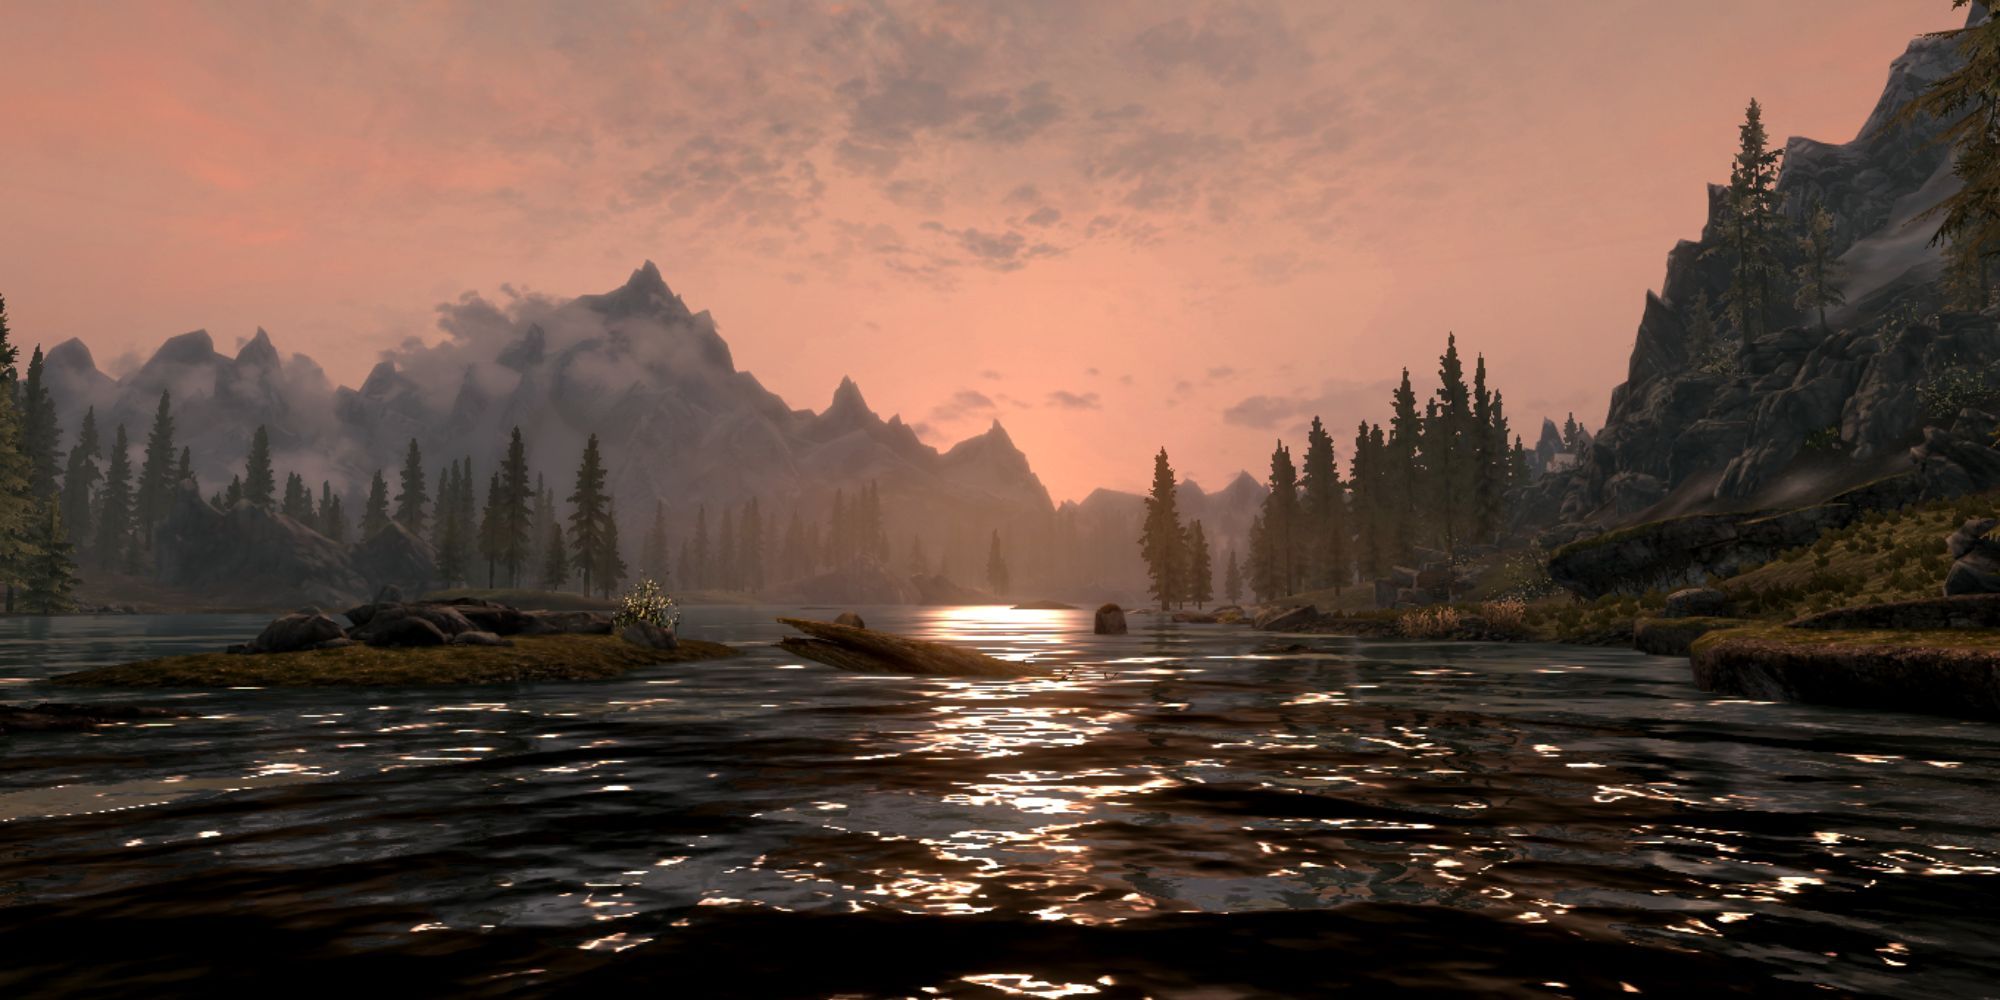 Lake Ilinalta is one of four lakes found in the province of Skyrim (five if...